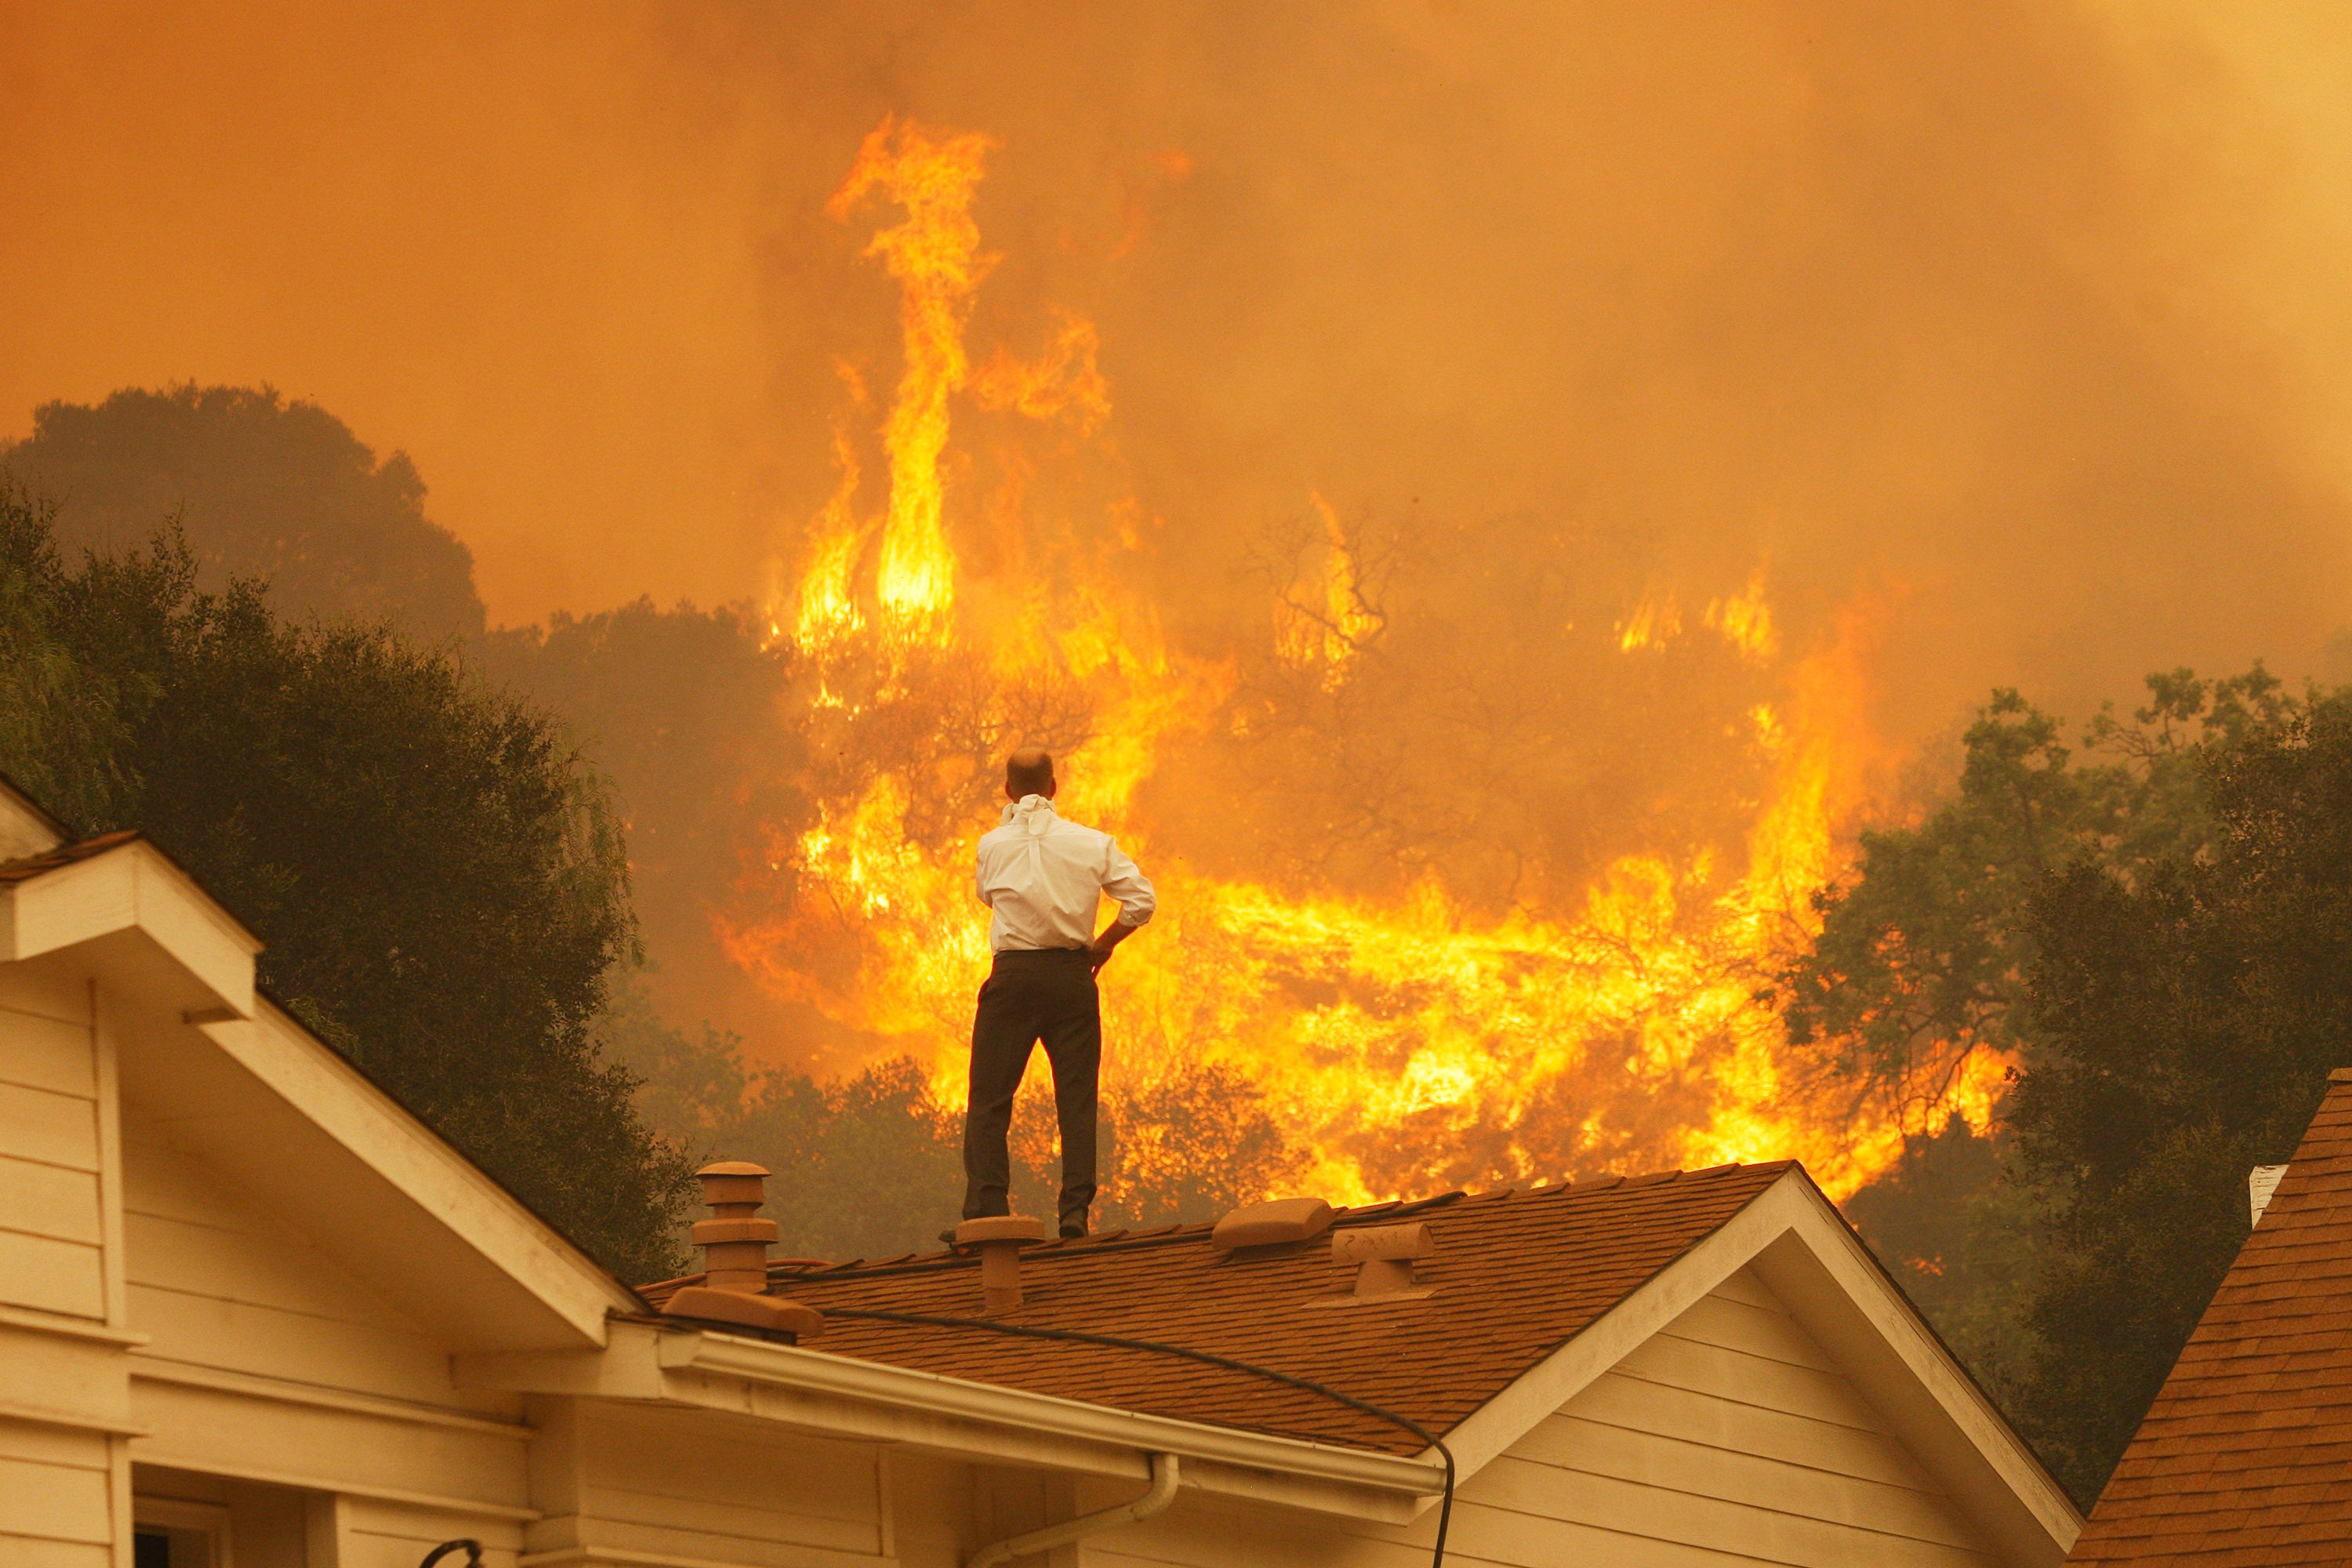 A man on a rooftop looks at approaching flames near Camarillo, California. The president-elect has promised to put climate action at the heart of his agenda for the next four years